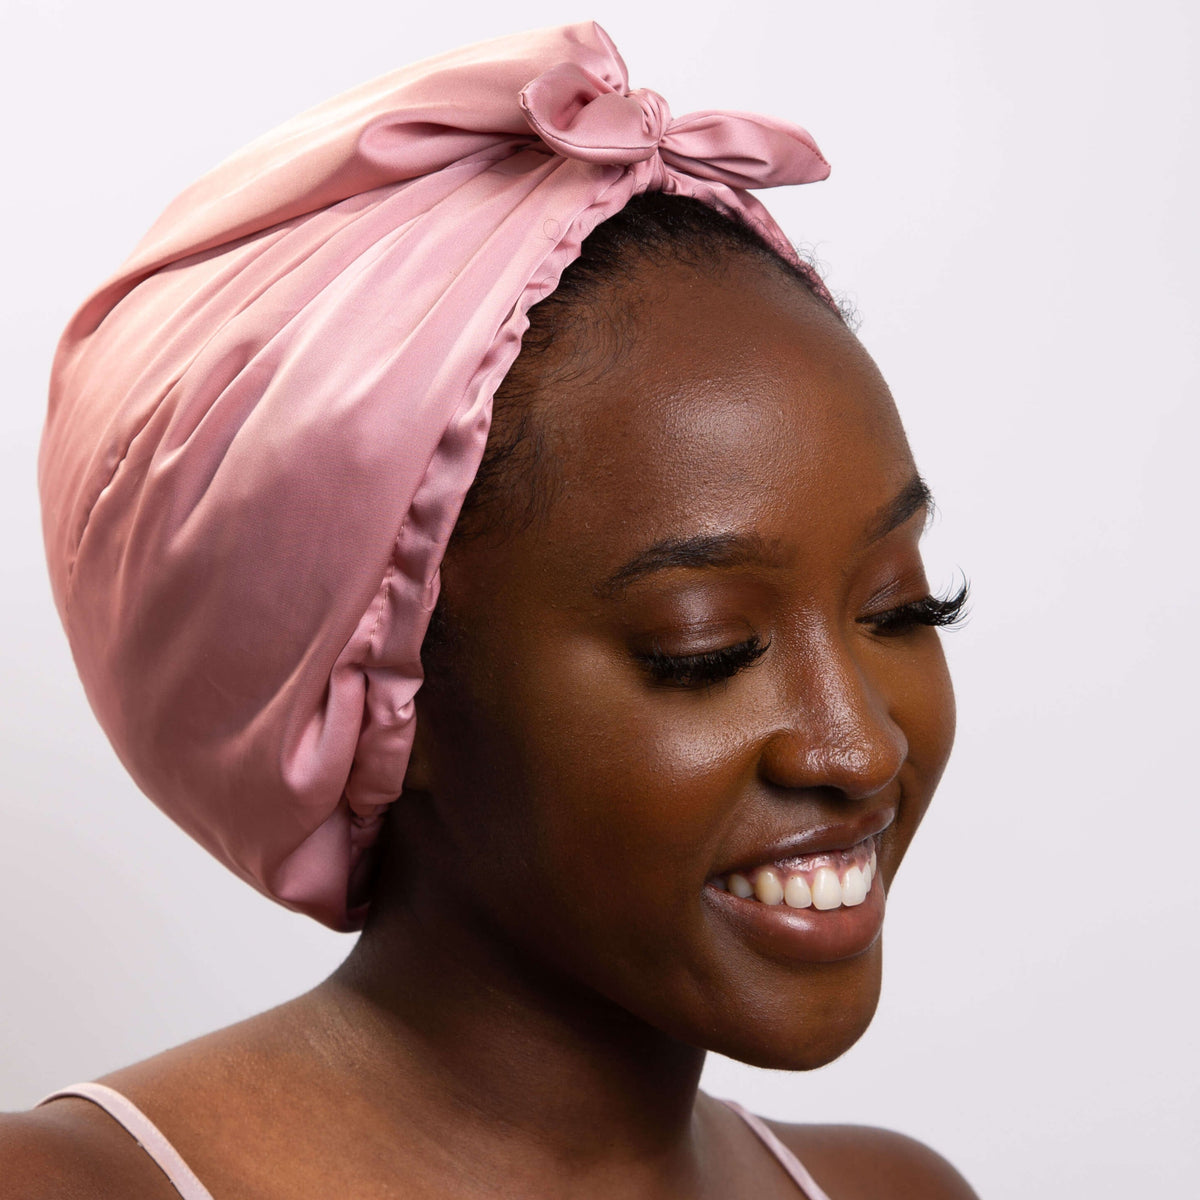 Only Curls Satin Sleep Turban - Dusty Rose - Only Curls